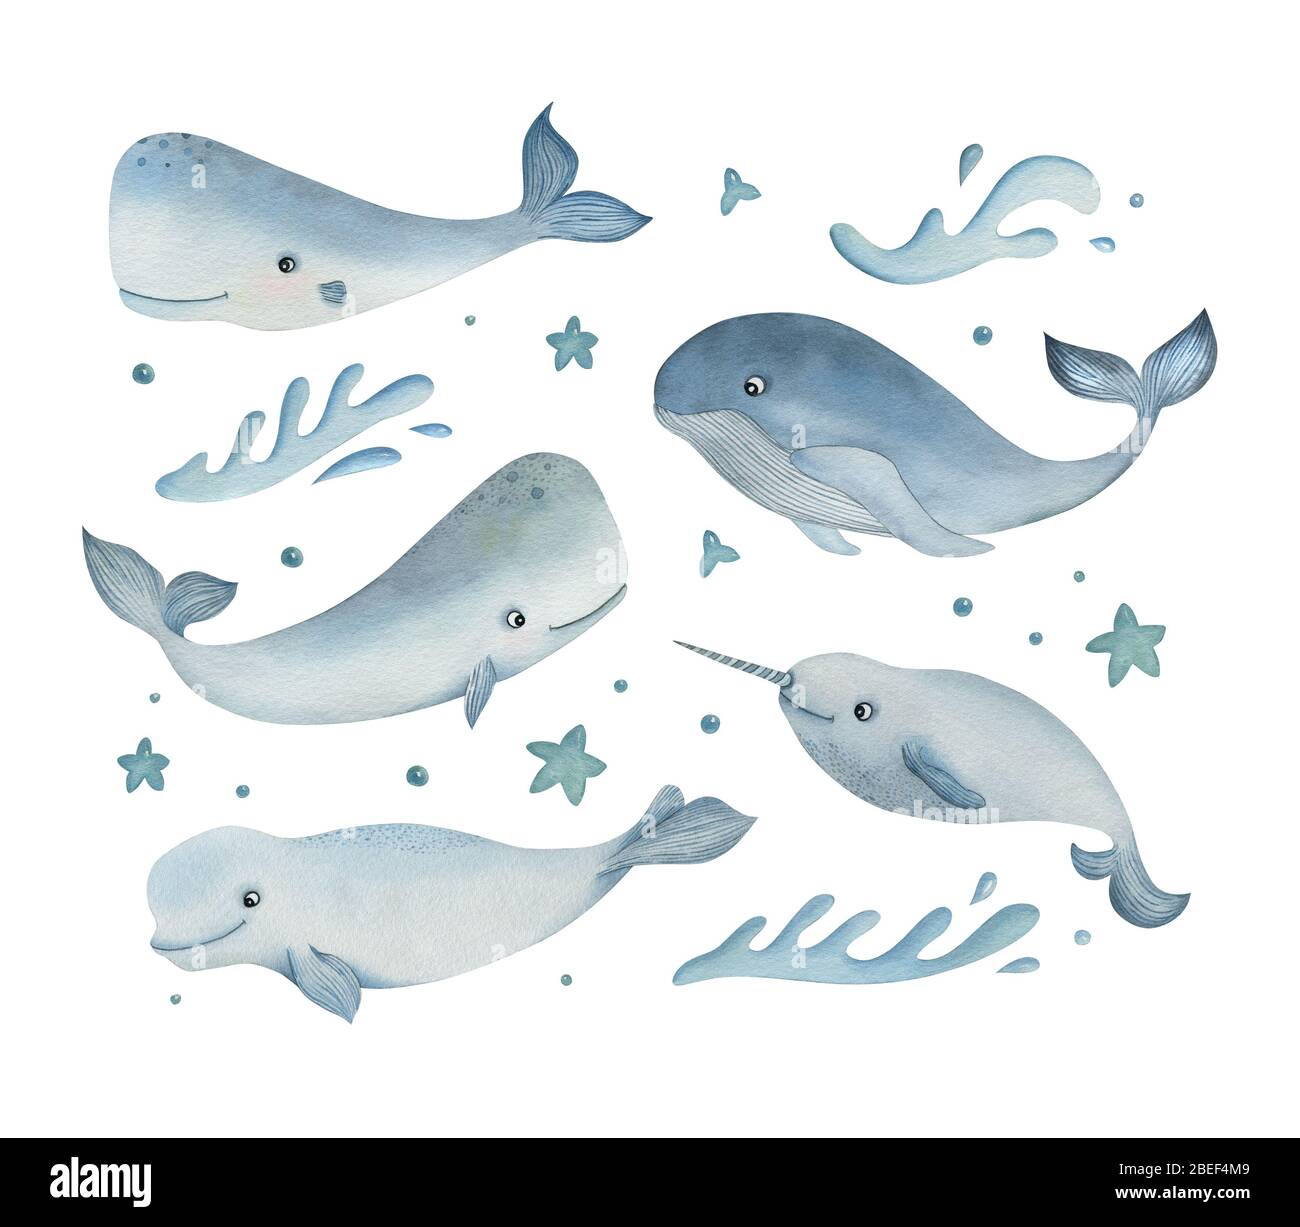 Watercolor set of sea animals on the white background. Cartoon whale, cachalot, narwhal, and beluga with decorative elements. Ideal for postcards. Stock Photo